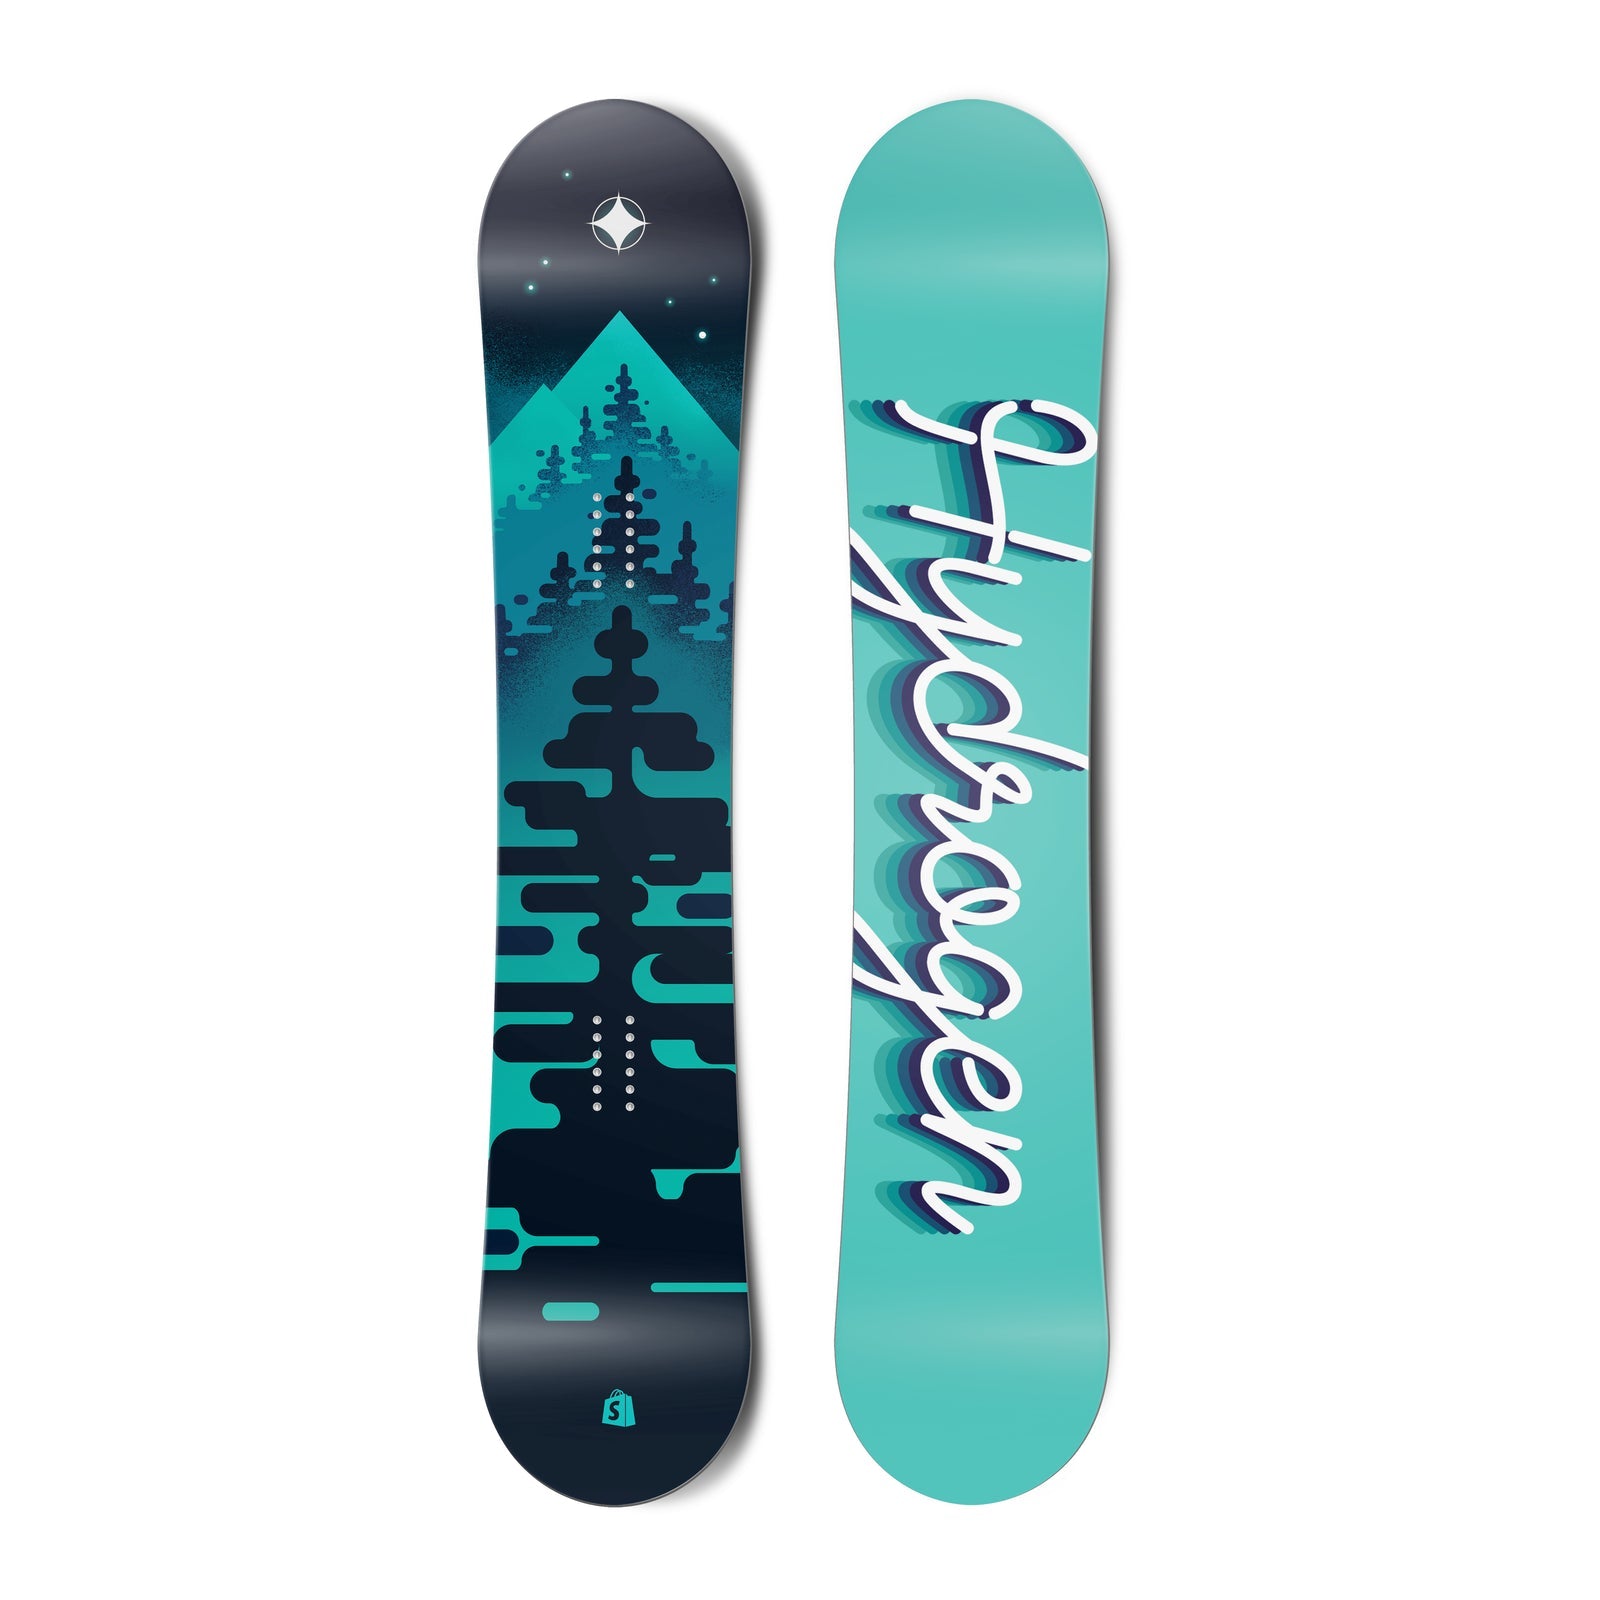 The Videographer Snowboard